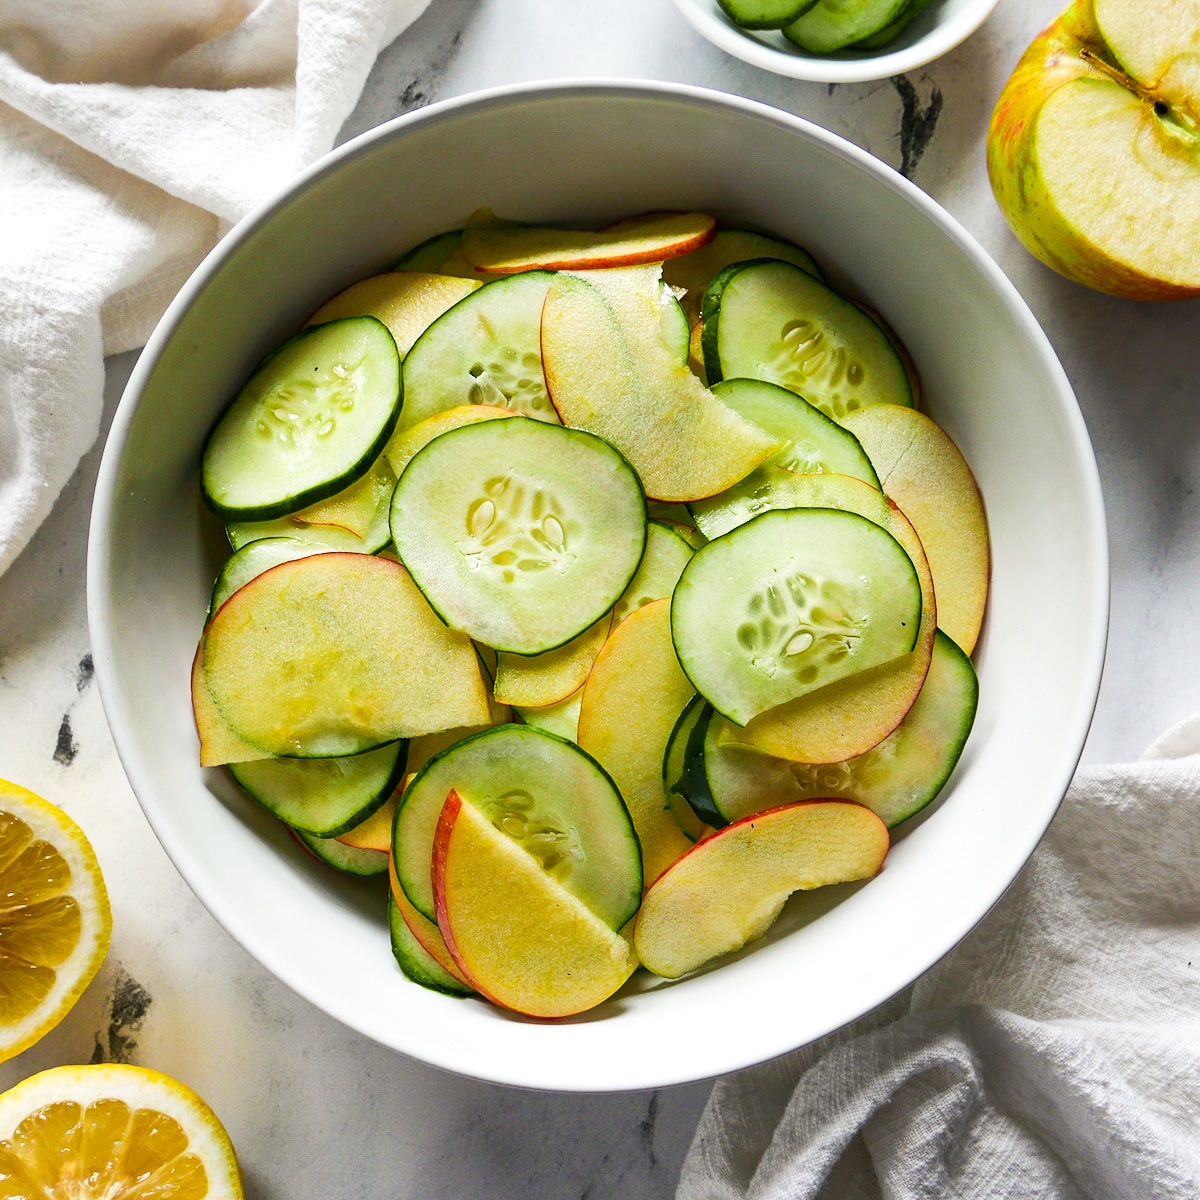 salad with sliced apple and cucumber on the side with a napkin.